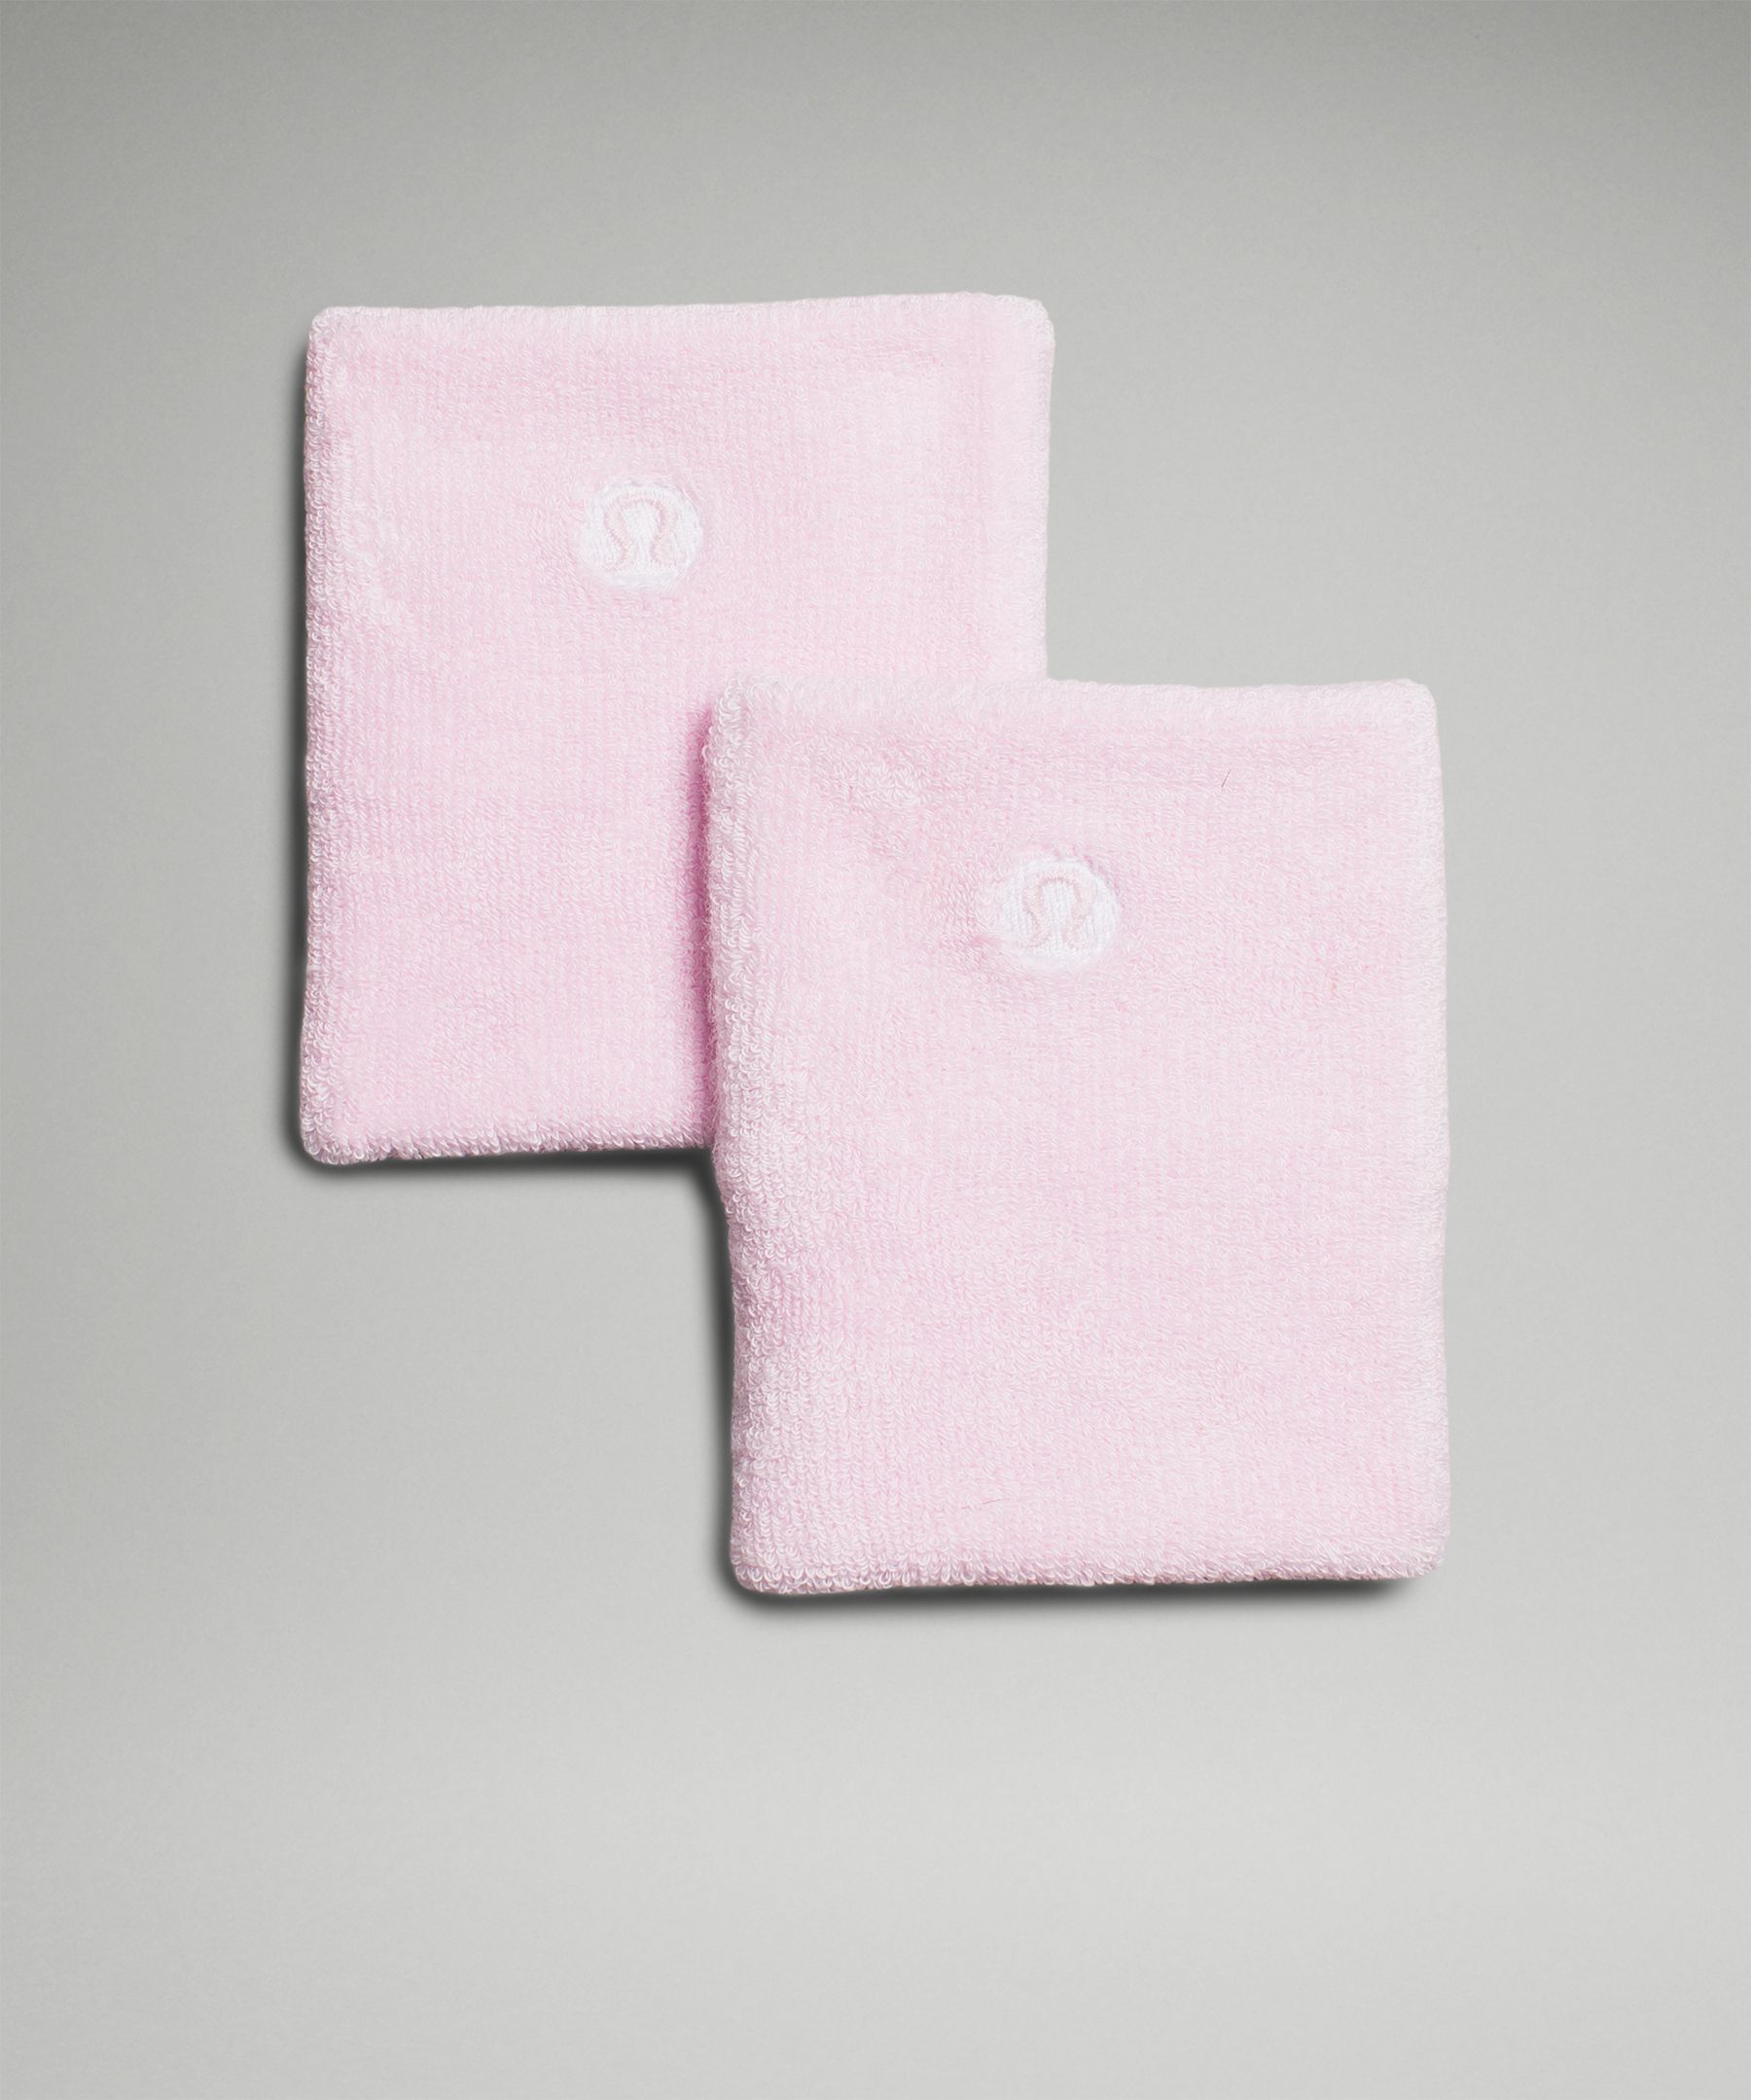 Lululemon Cotton Terry Wristband 2 Pack In Pink